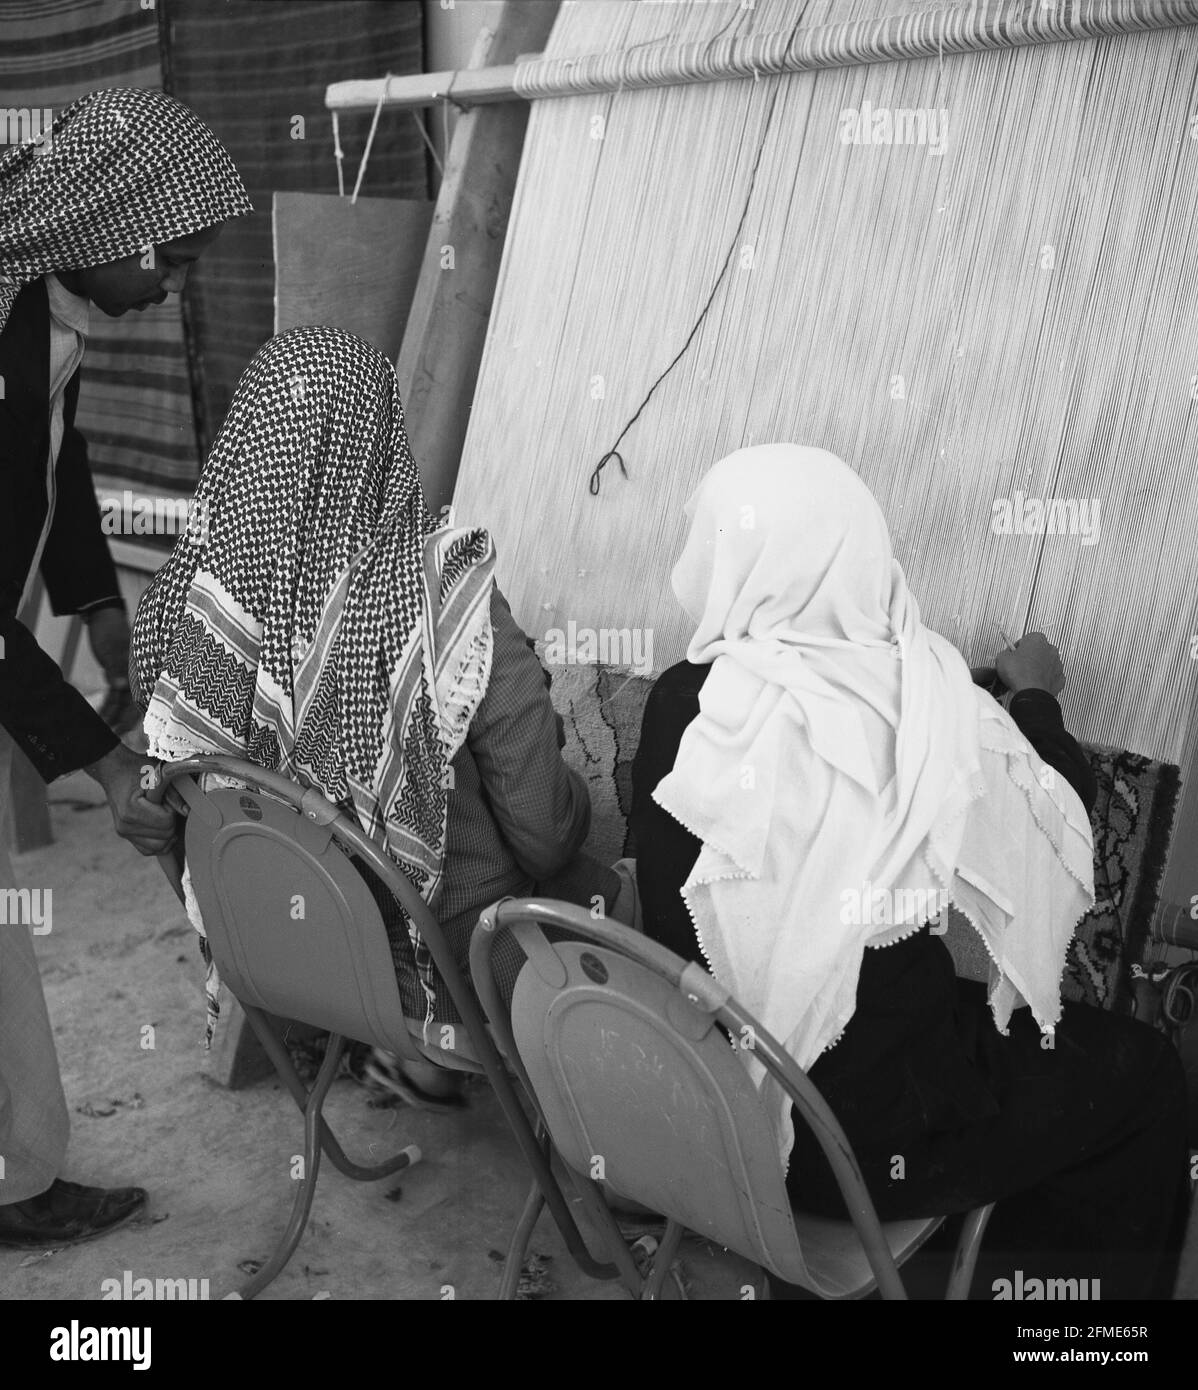 1960s, historical, two male Bedouin arabs in traditional dress and headwear, one wearing a tablecloth-like pattern, the other a plain white cloth, sitting outside doing traditional weaving, making a rug on a hand-loom, Jeddah, Saudi Arabia. The discovery of oil and the industrialisation of the country saw traditional handcrafts such as weaving go to decline. Stock Photo